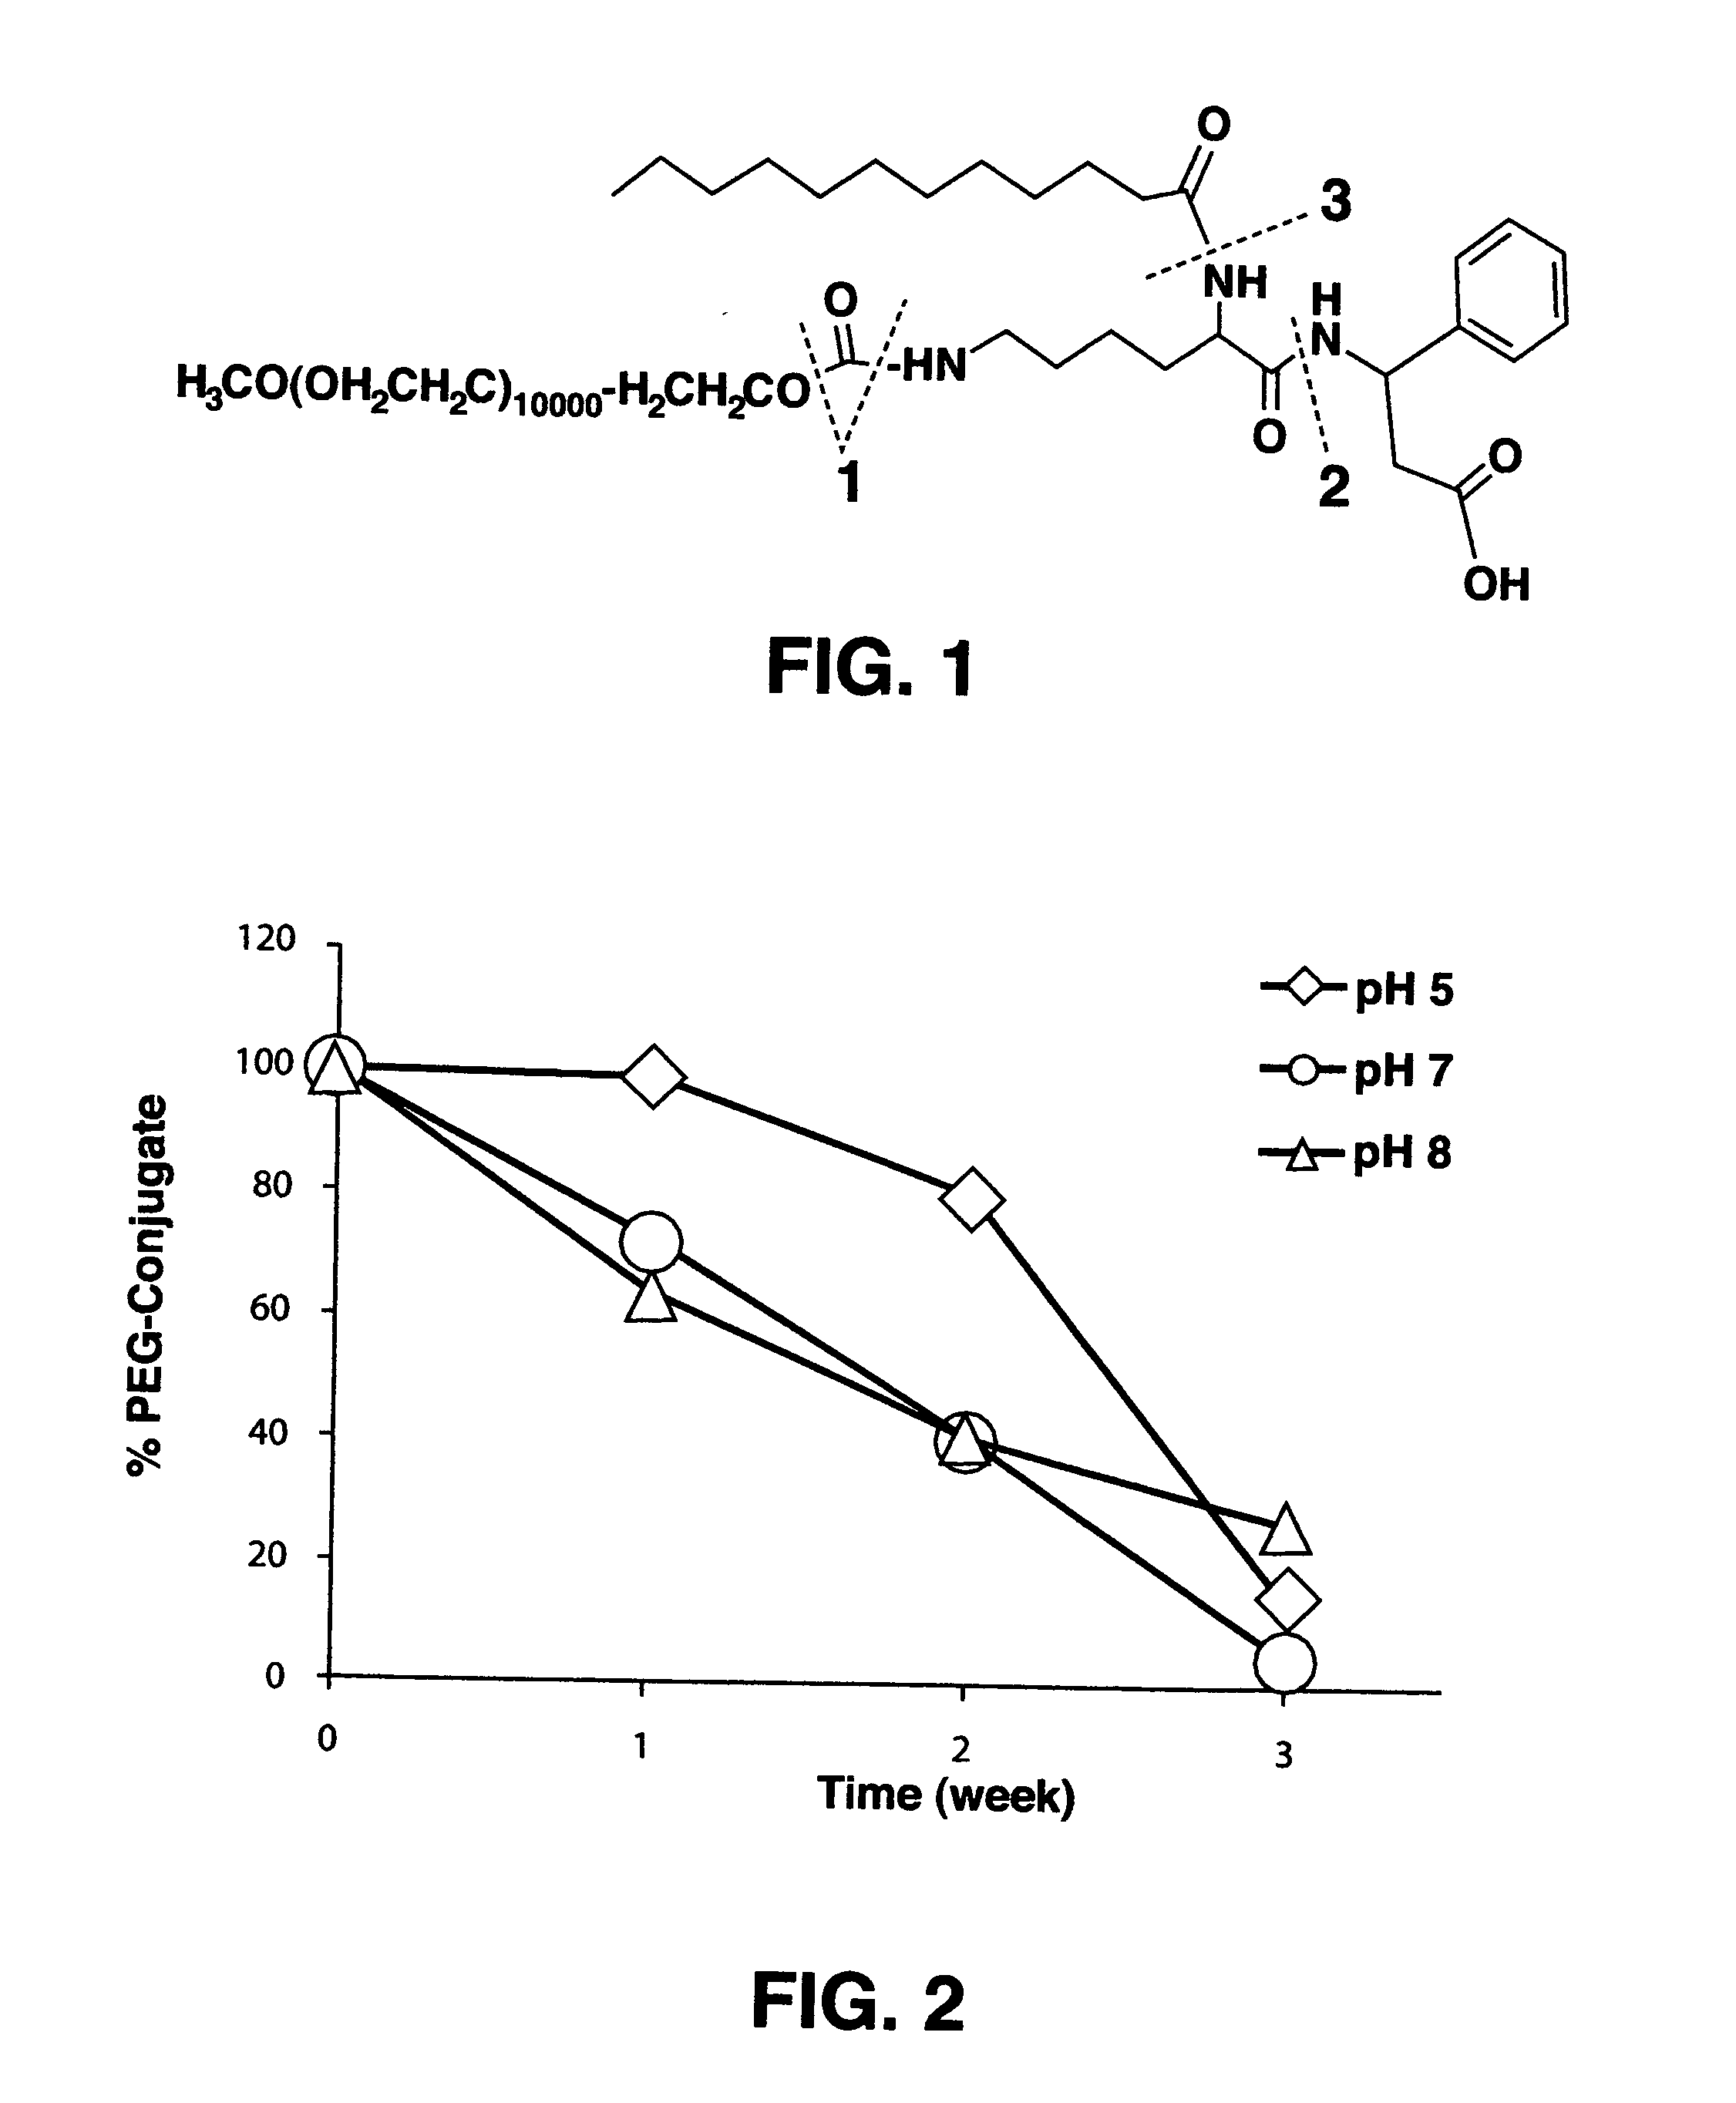 Protein-carrier conjugates